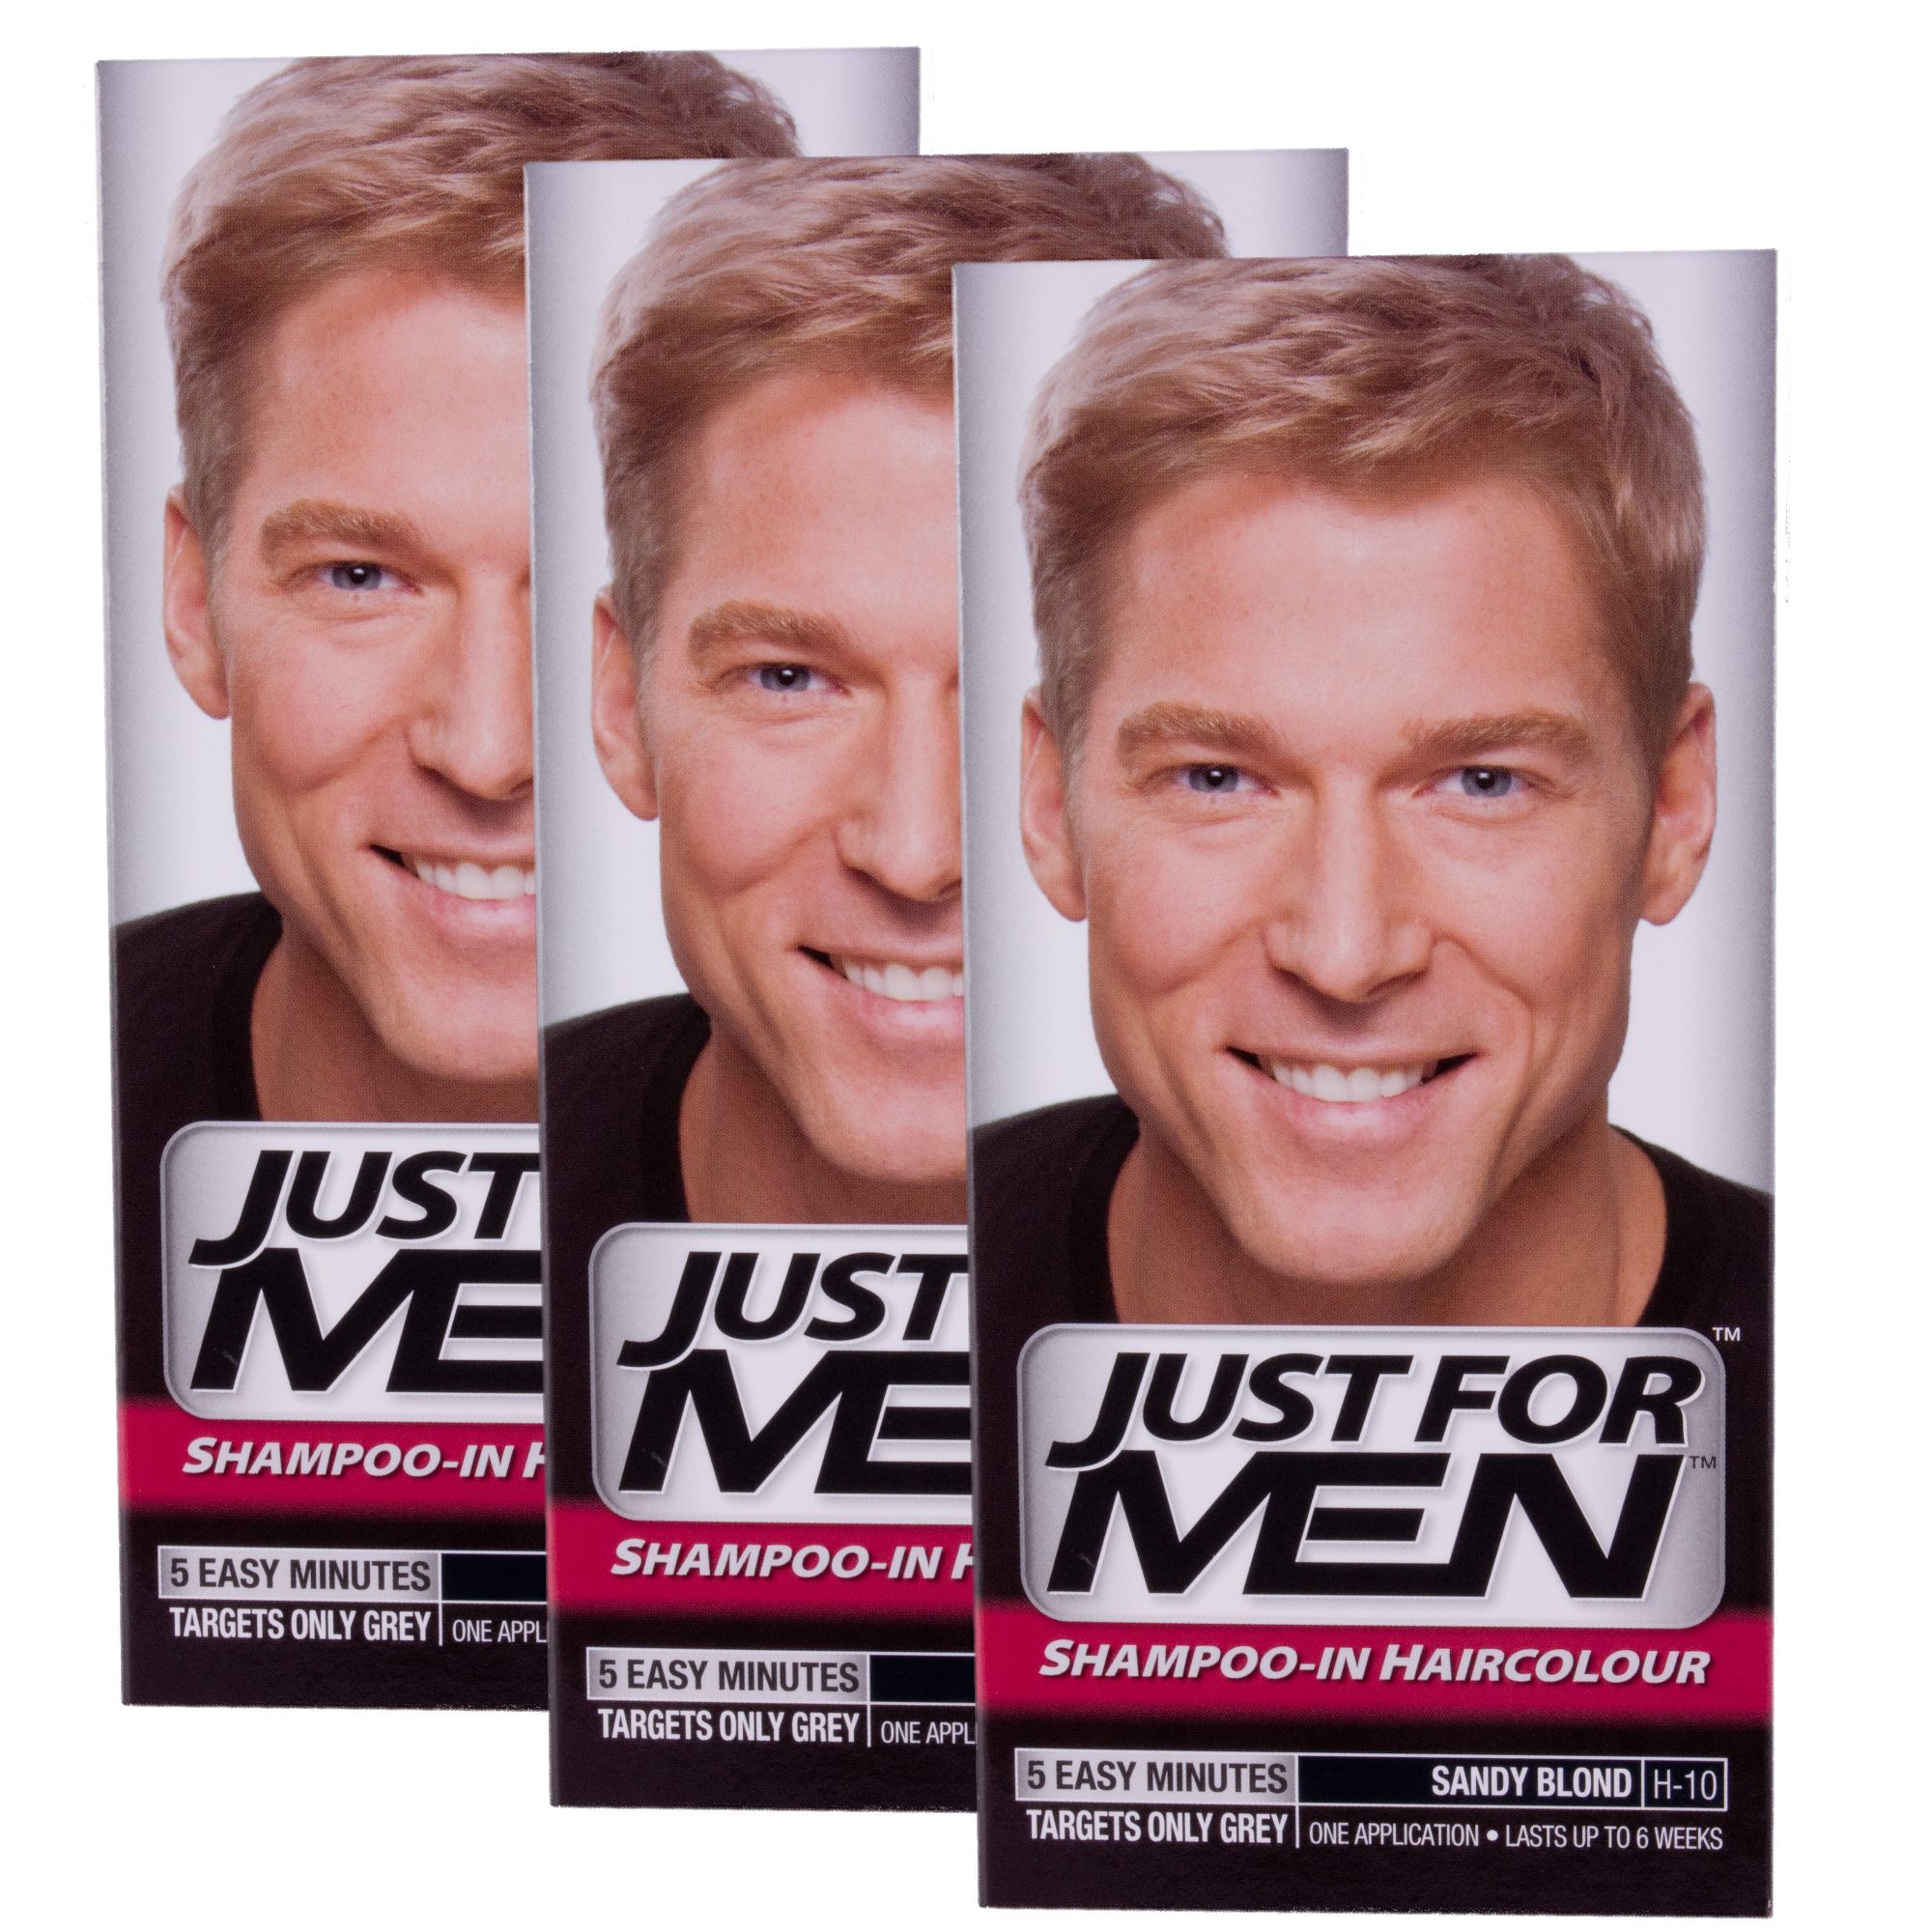 3 x Just For Men Shampoo In Hair Colour - Sandy Blonde H10 - The Groomed Man